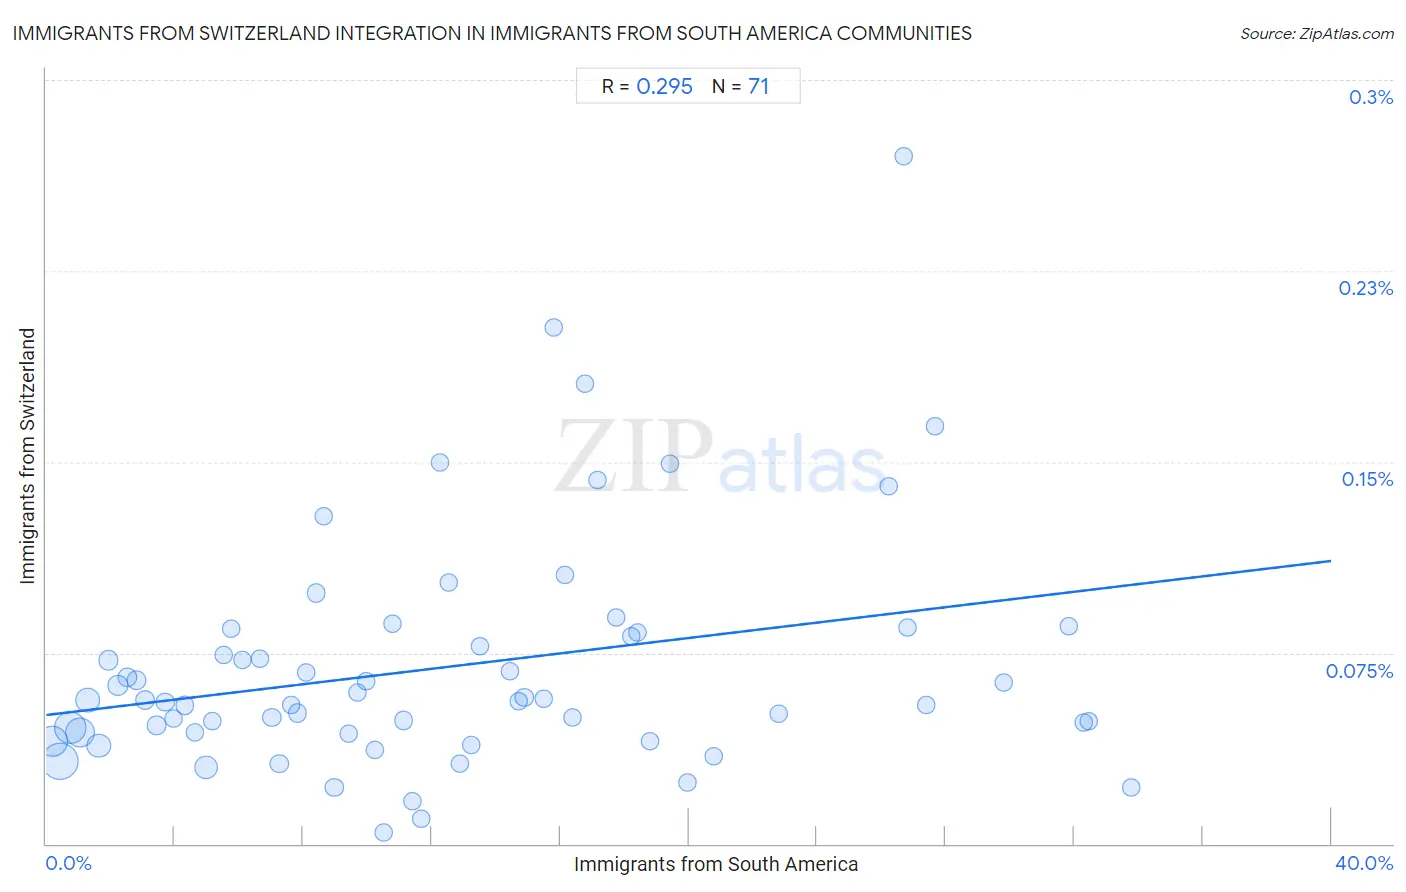 Immigrants from South America Integration in Immigrants from Switzerland Communities